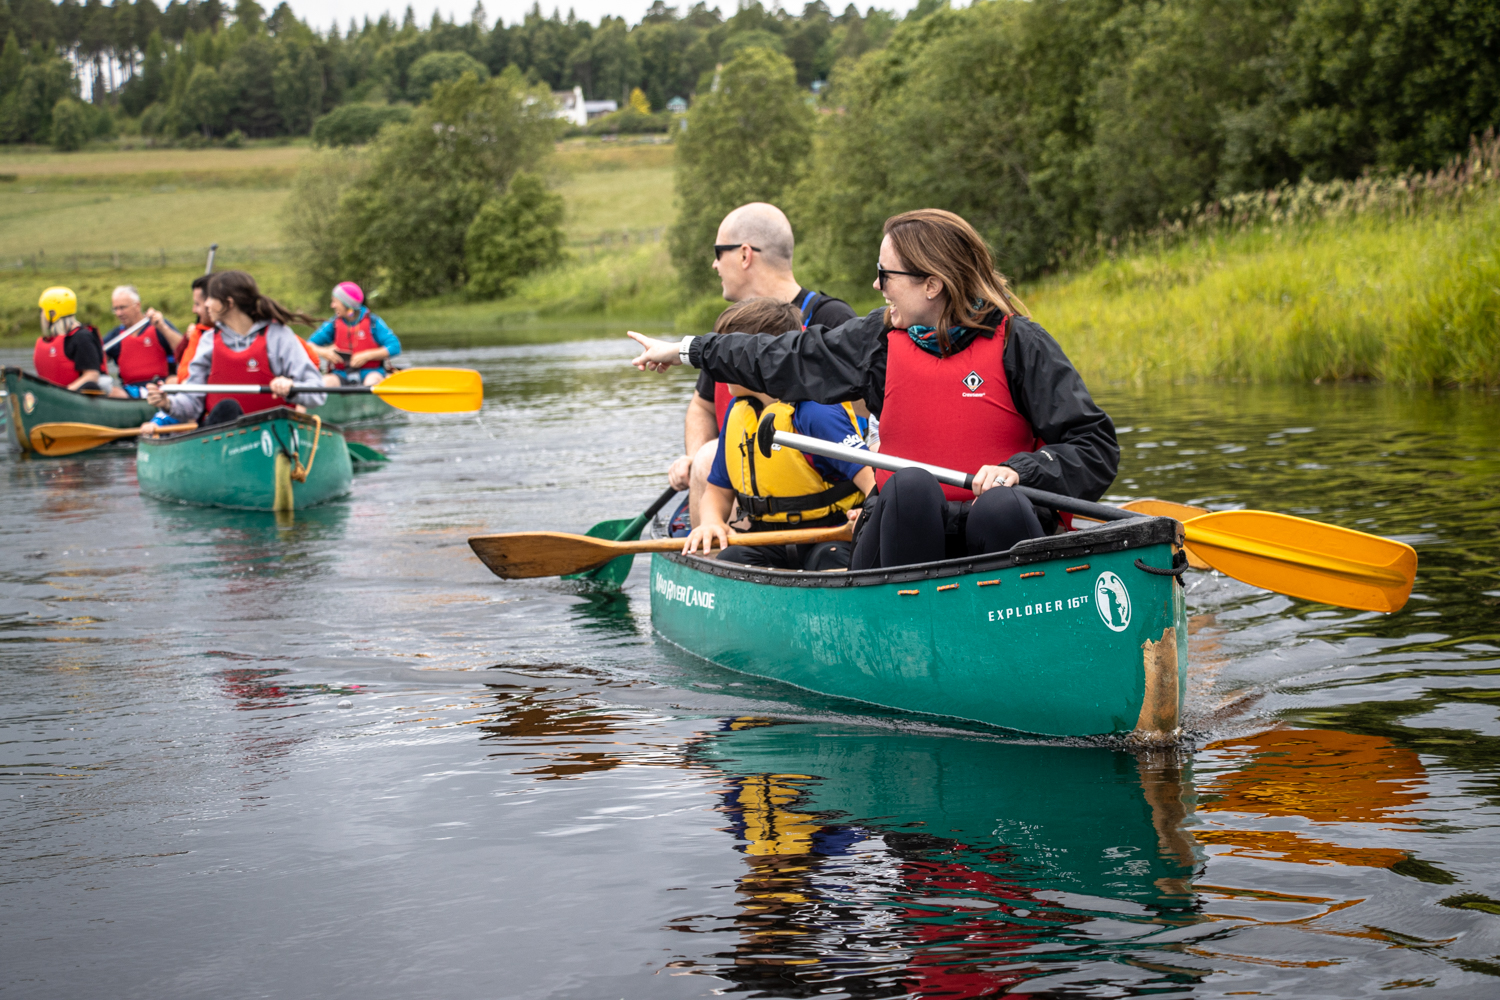 A family enjoying a guided canoeing tour on the River Spey